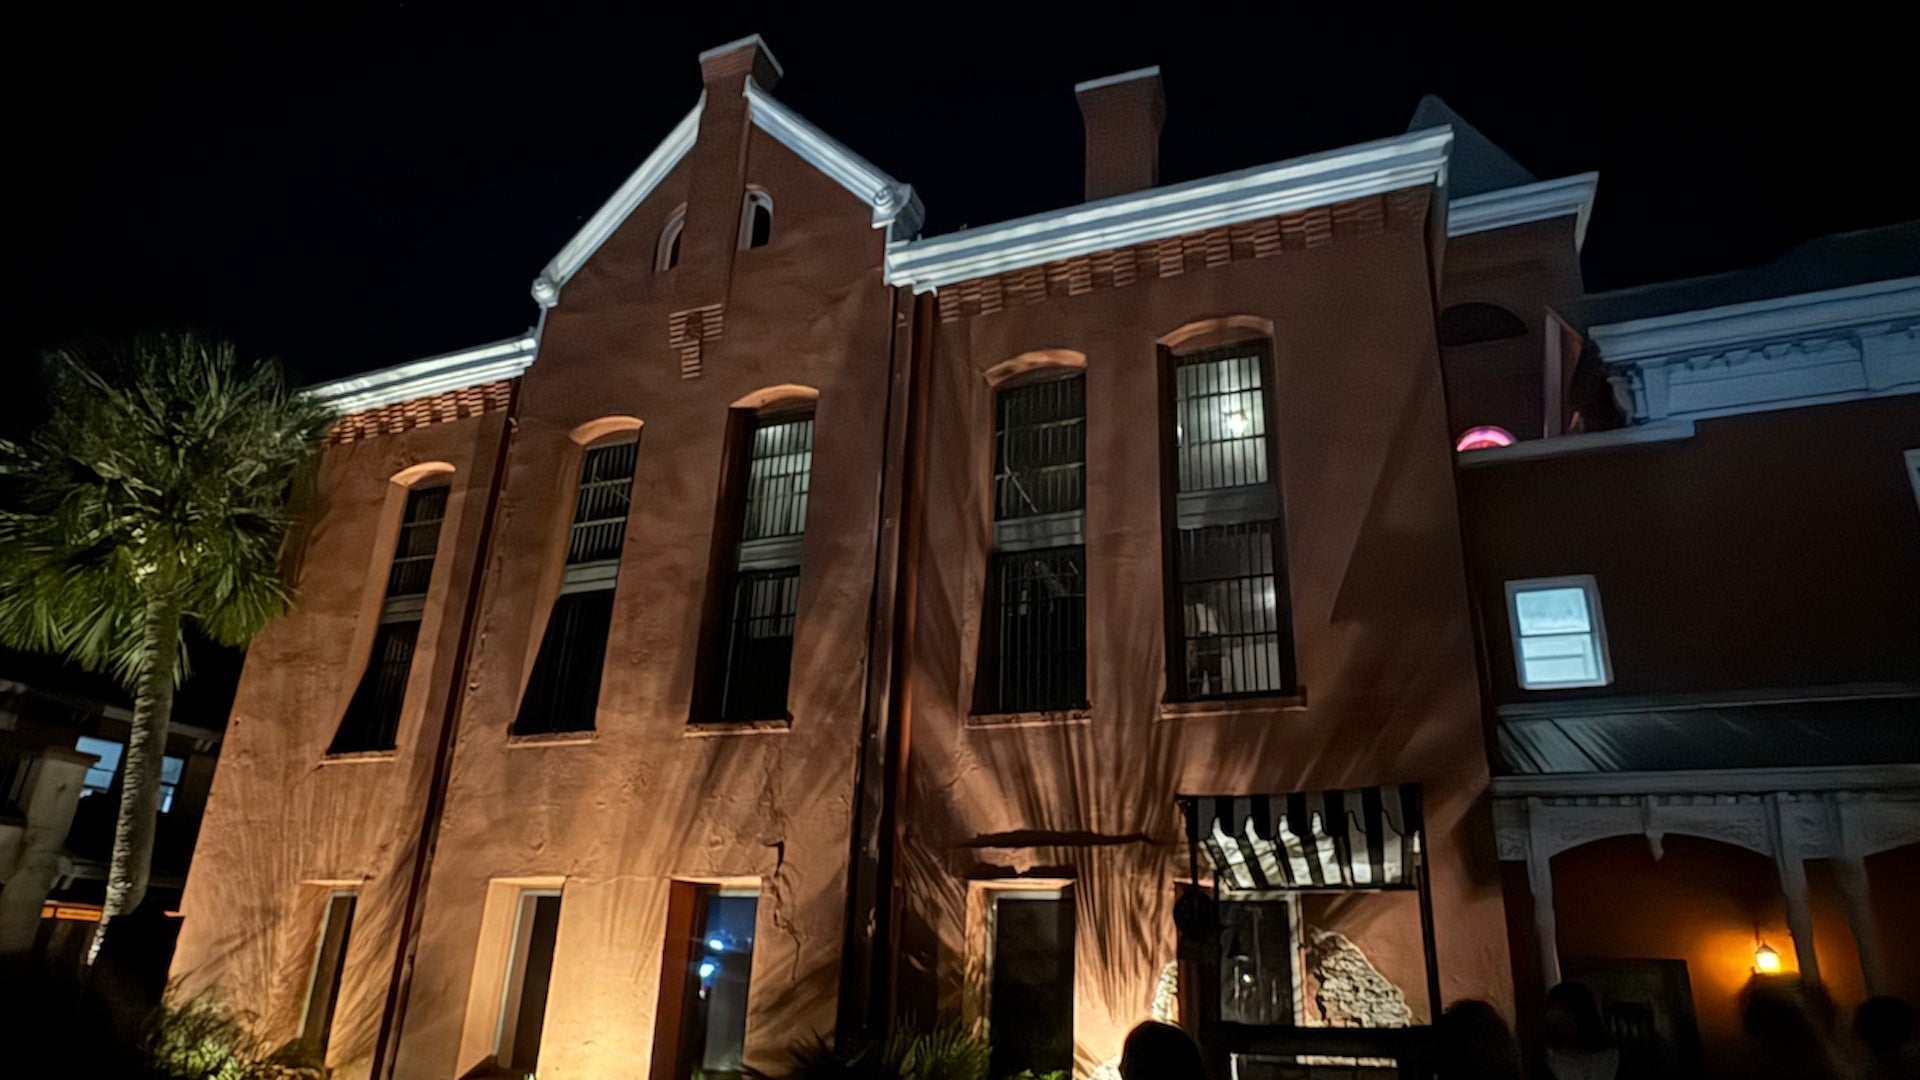 Exterior of old jail building at night